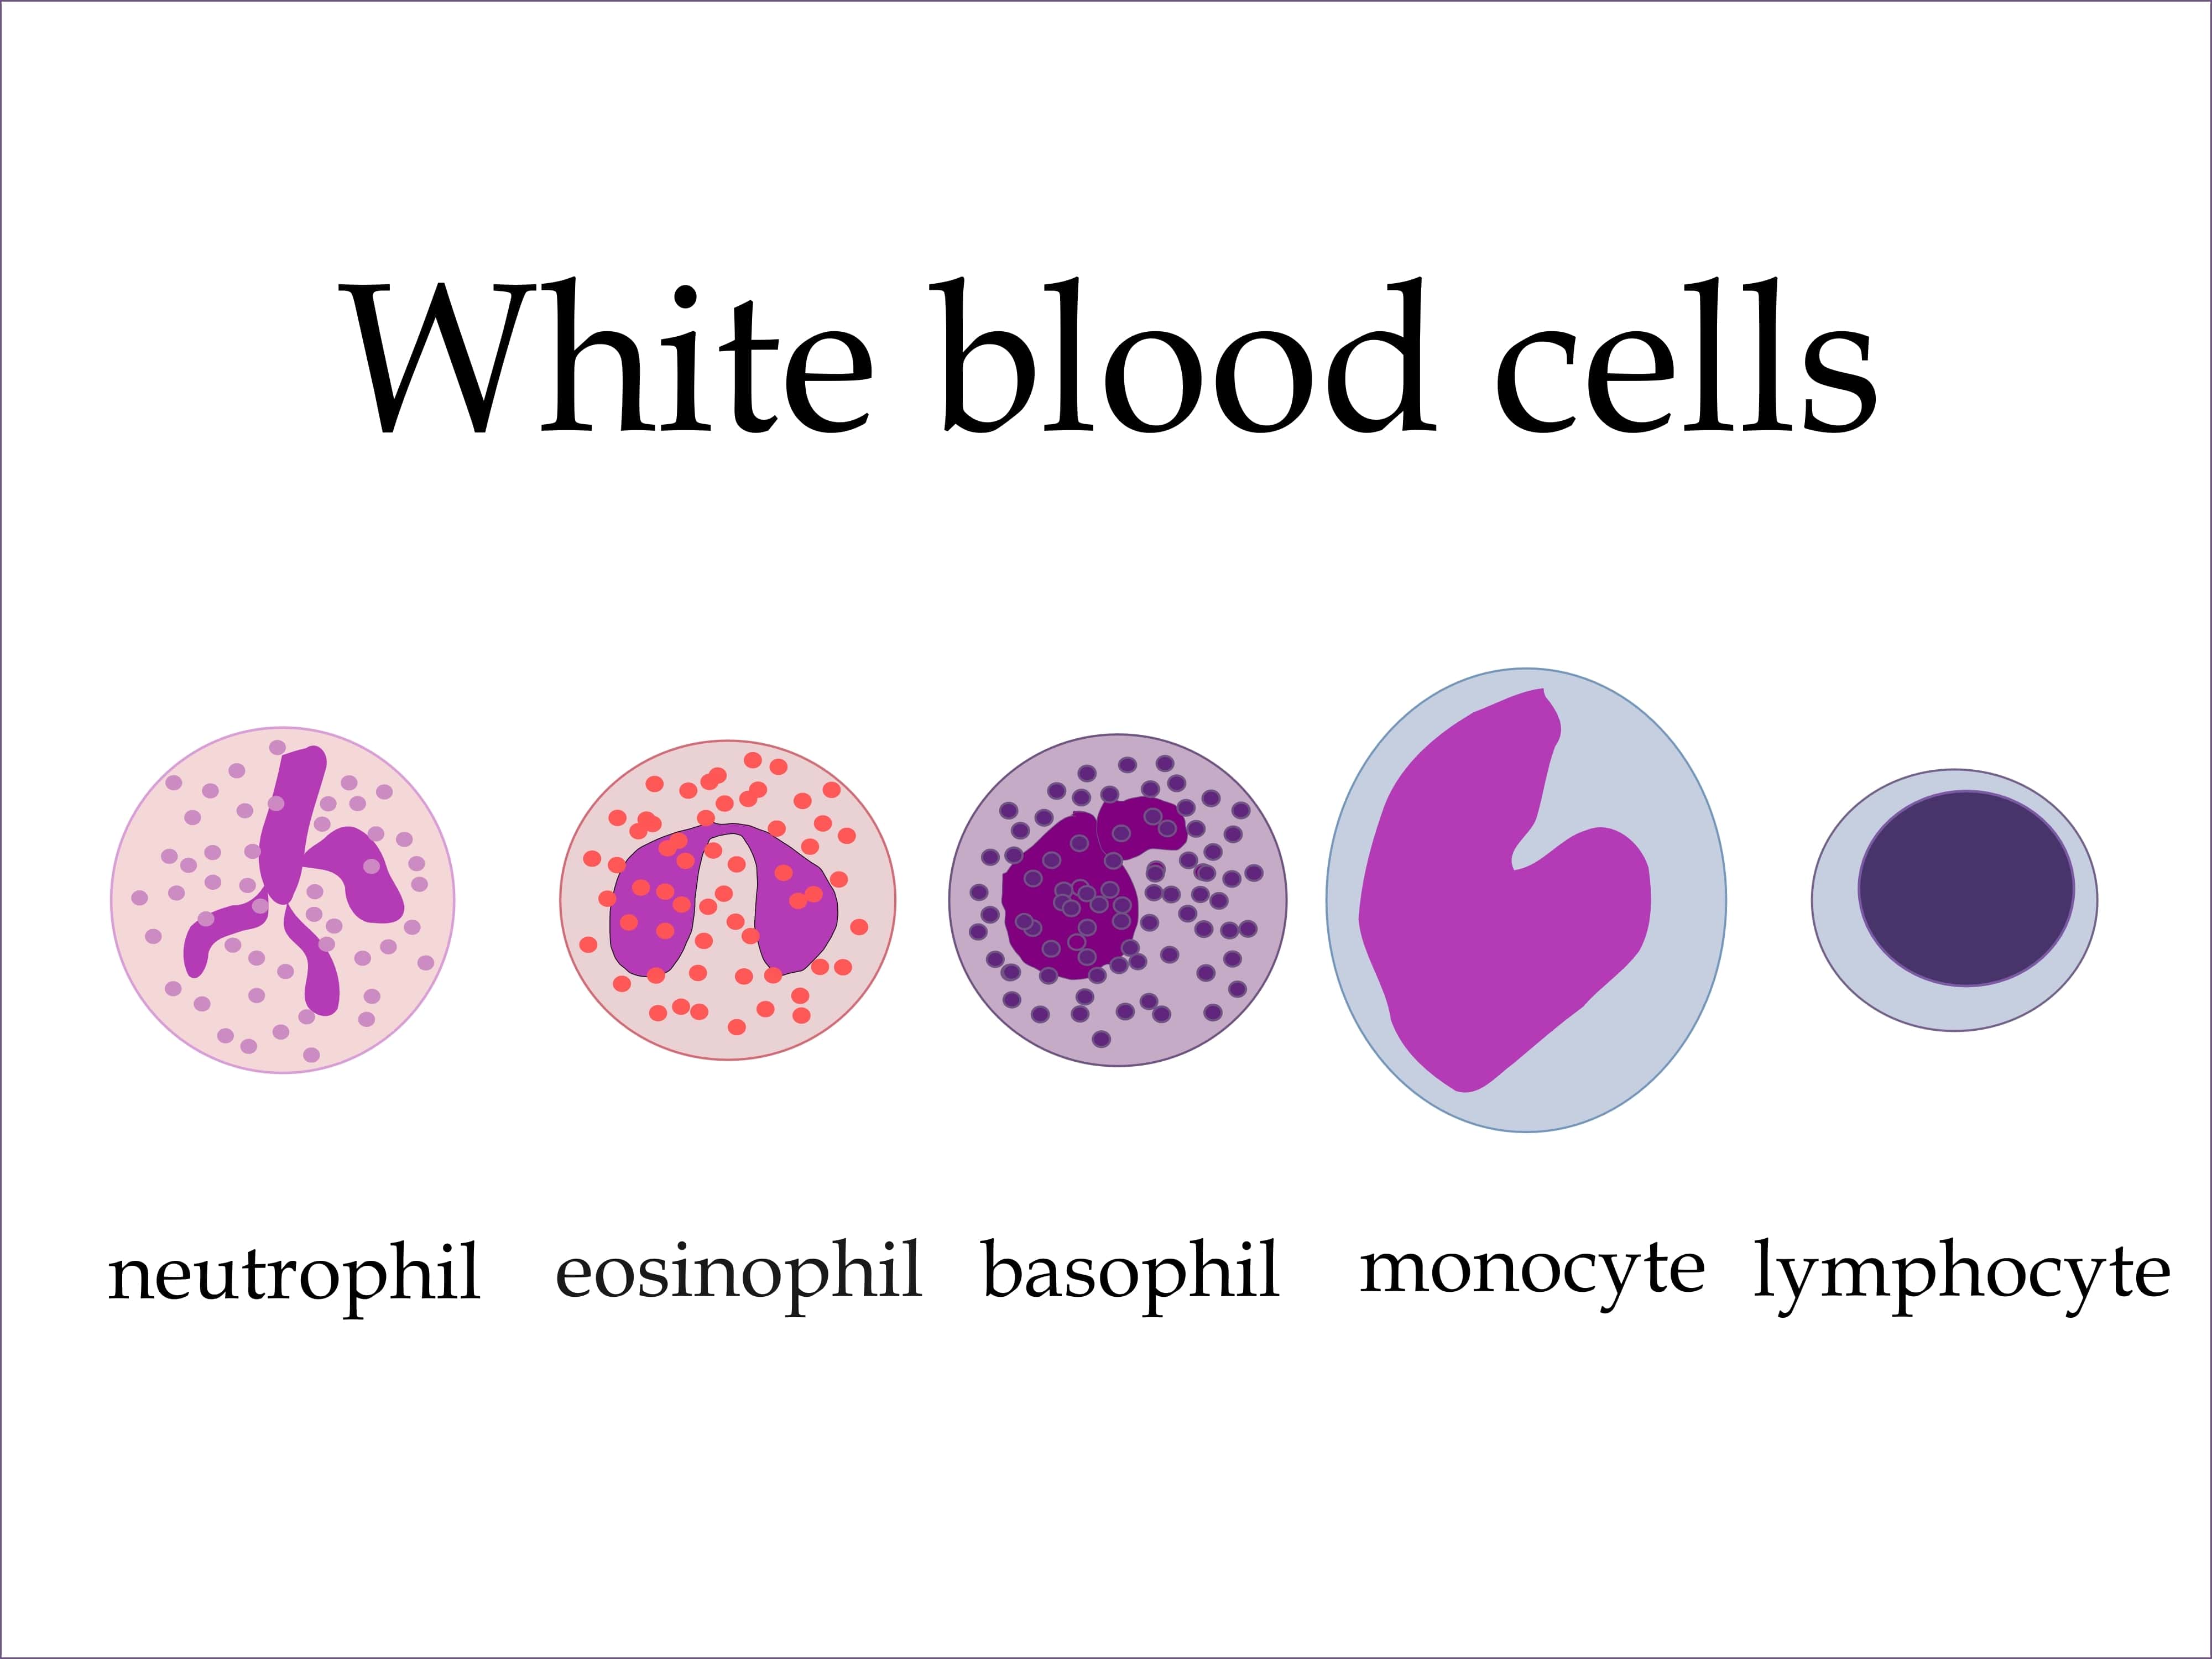 Types of white blood cells